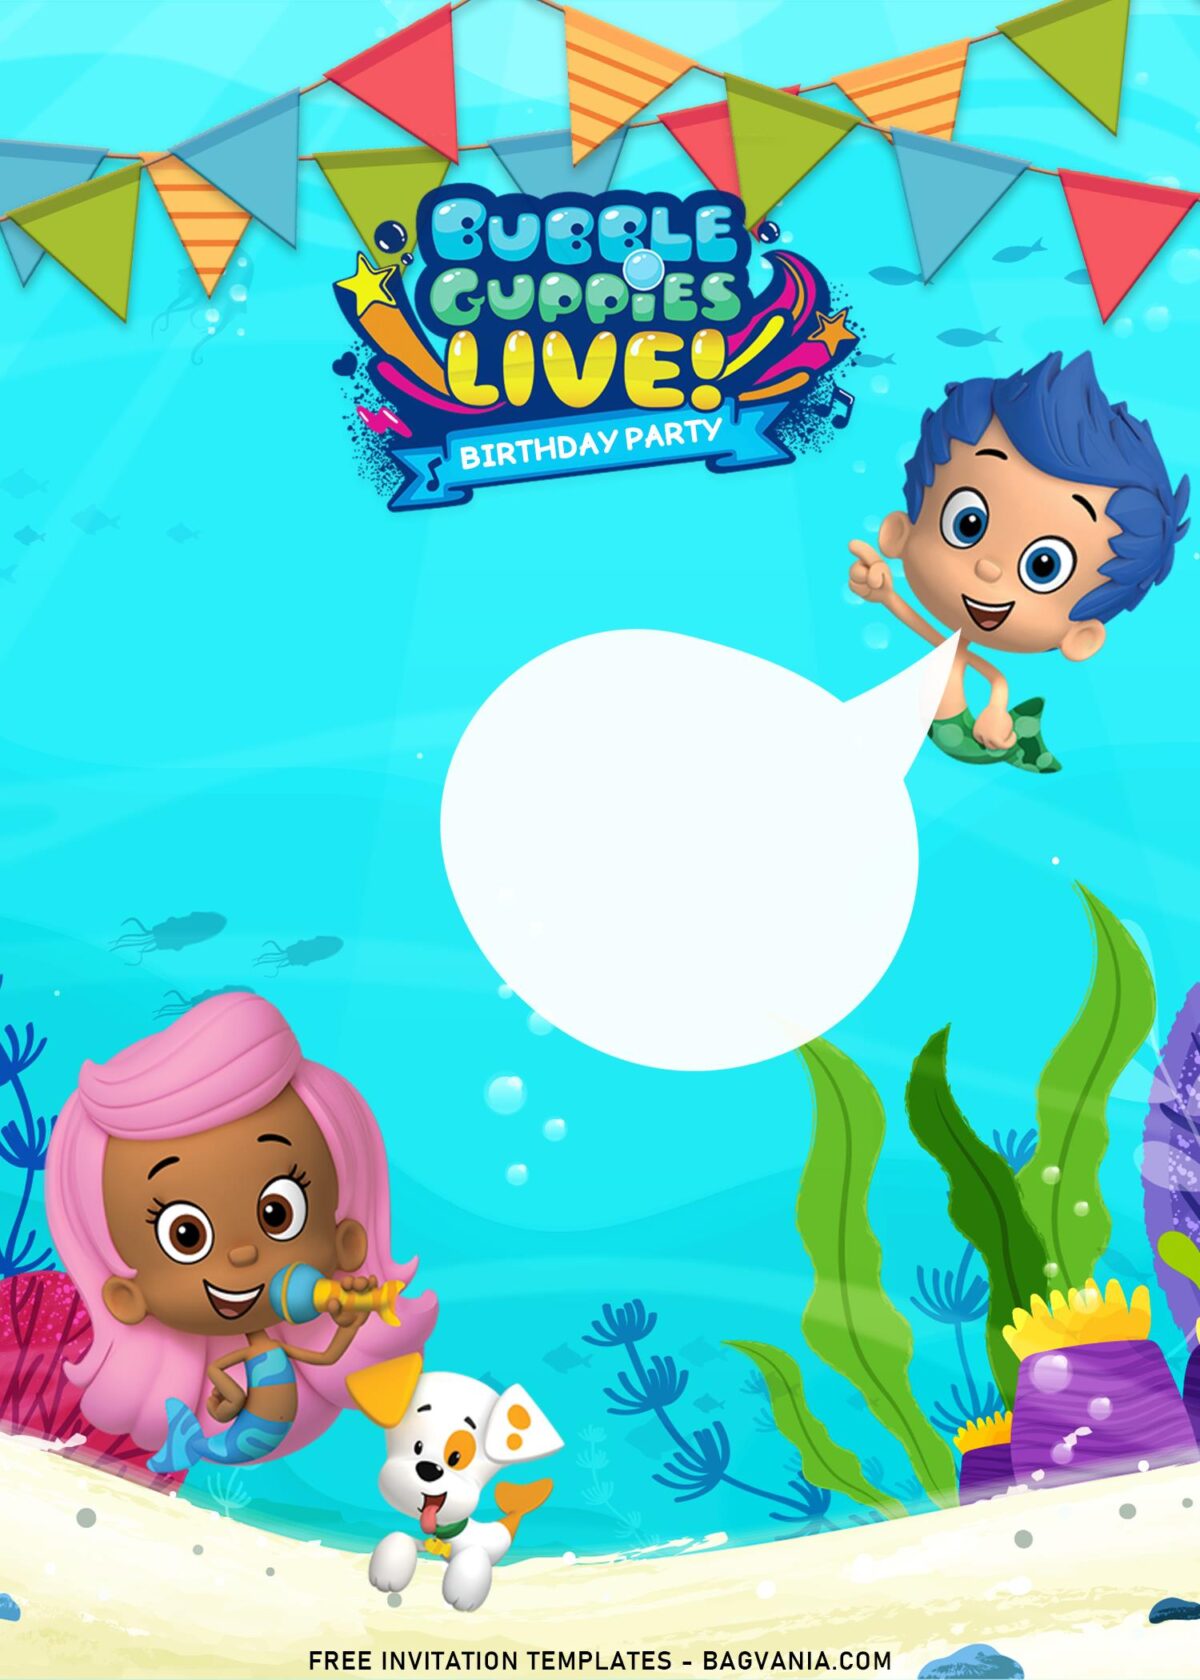 11+ Adorable Bubble Guppies Birthday Invitation Templates with Gil